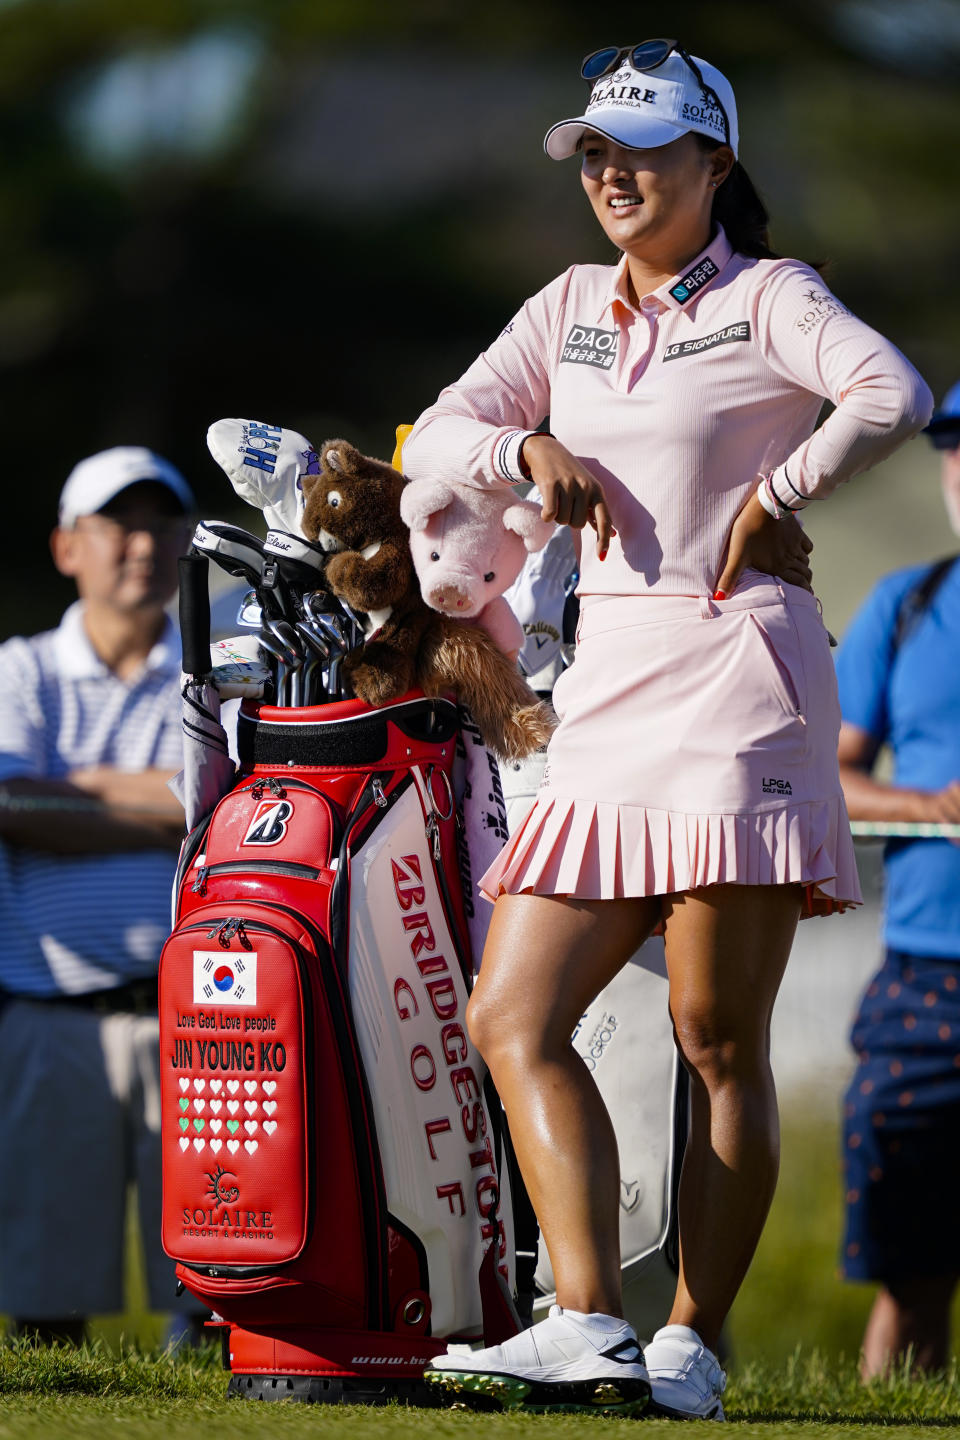 Jin Young Ko, of South Korea, waits to play the 10th hole during the first round of the ShopRite LPGA Classic golf tournament, Friday, June 10, 2022, in Galloway, N.J. (AP Photo/Matt Rourke)